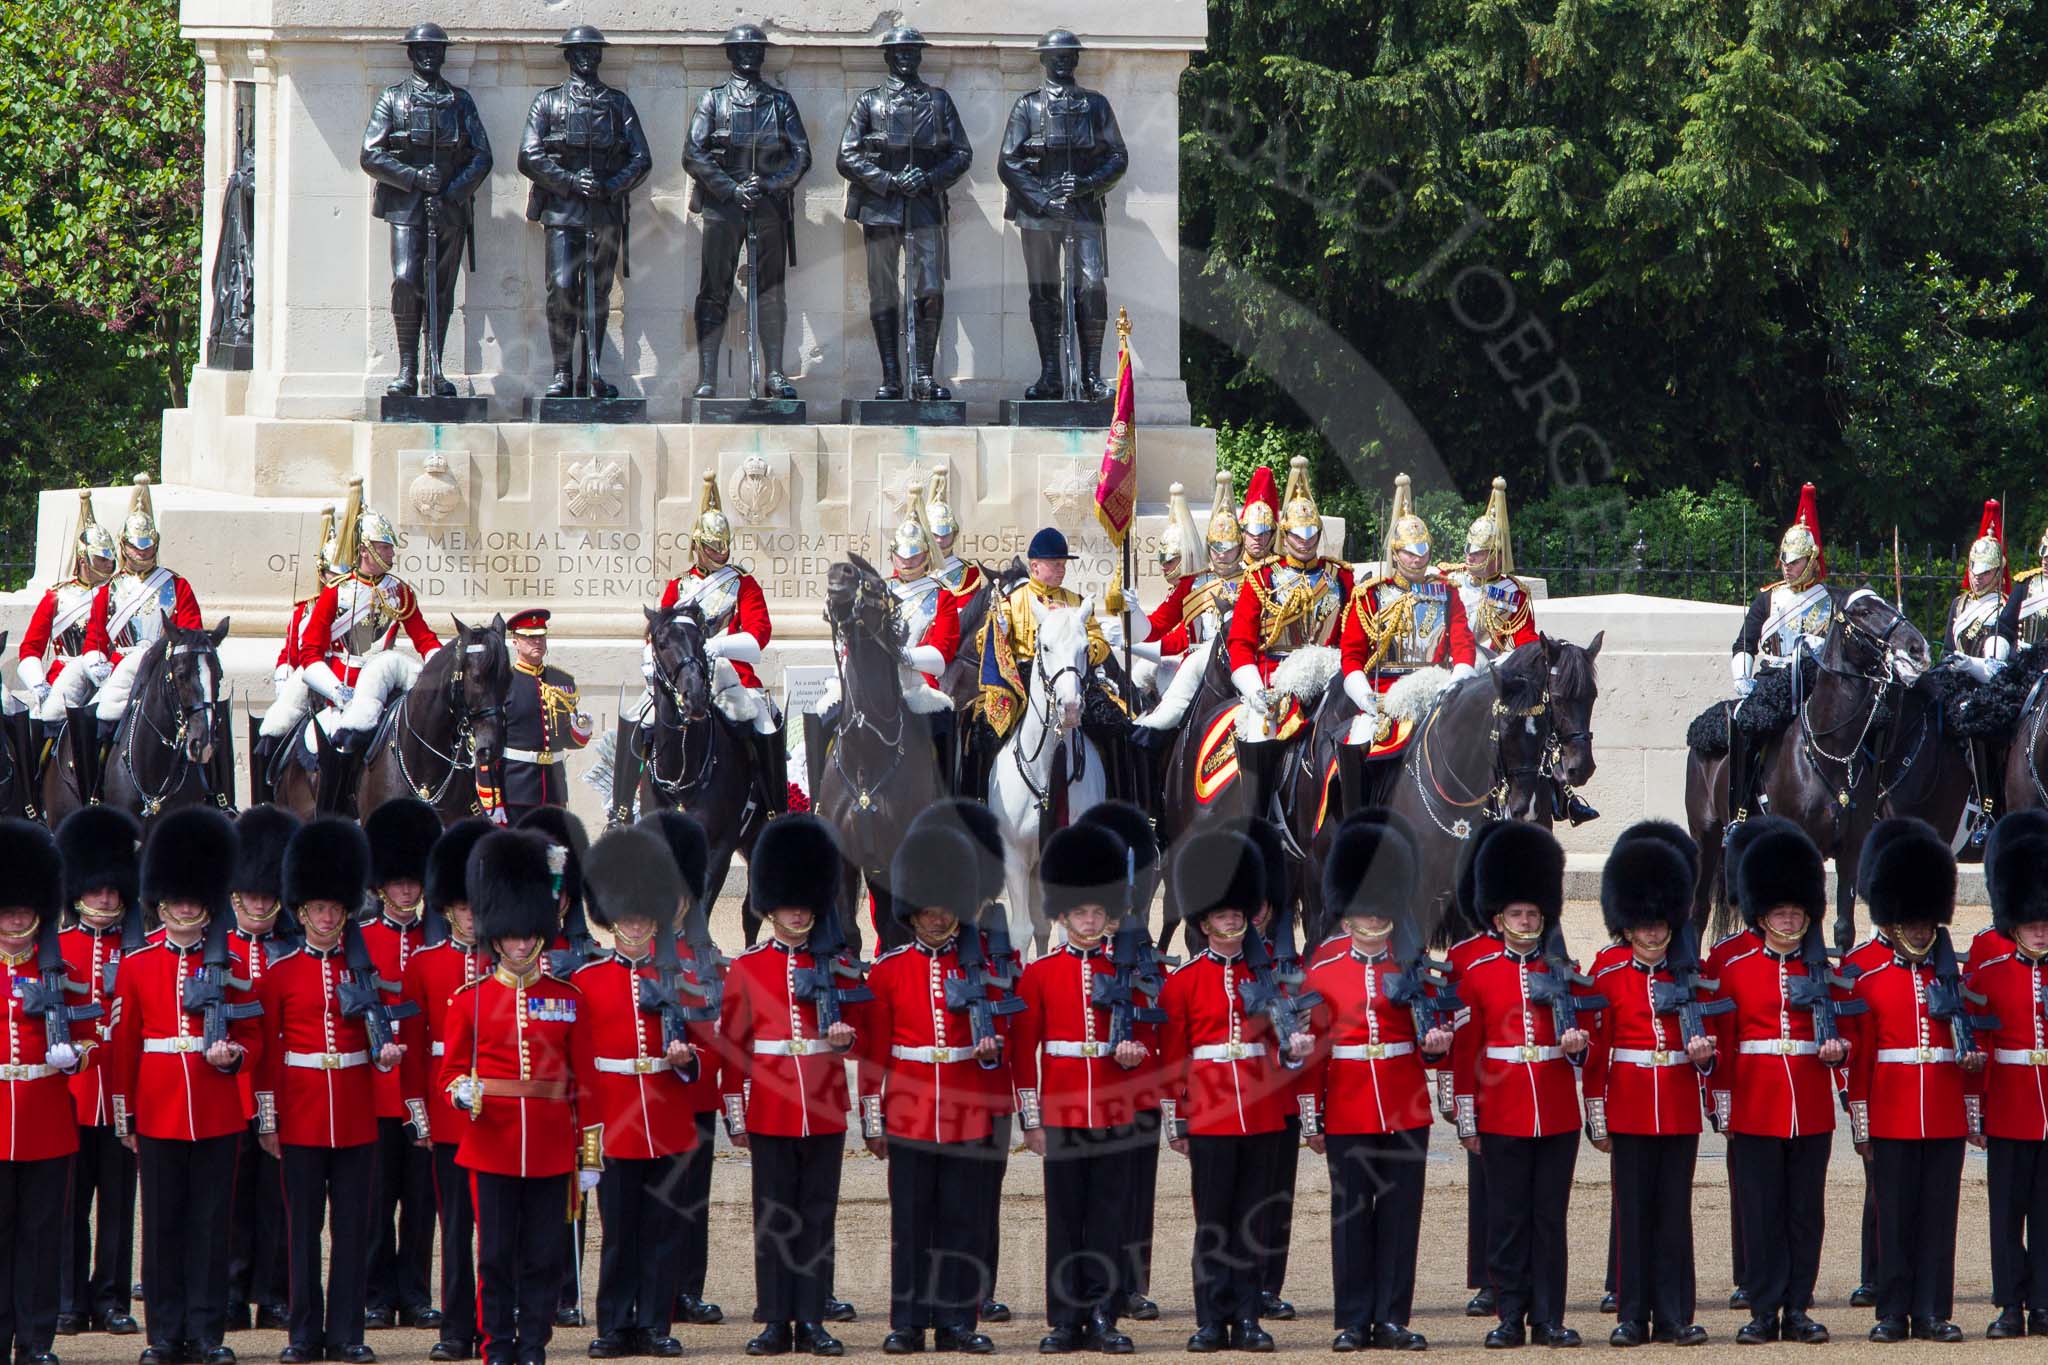 The Colonel's Review 2013: The Household Cavalry is back to their initial position on the norther side of Horse Guards Parade..
Horse Guards Parade, Westminster,
London SW1,

United Kingdom,
on 08 June 2013 at 12:00, image #794